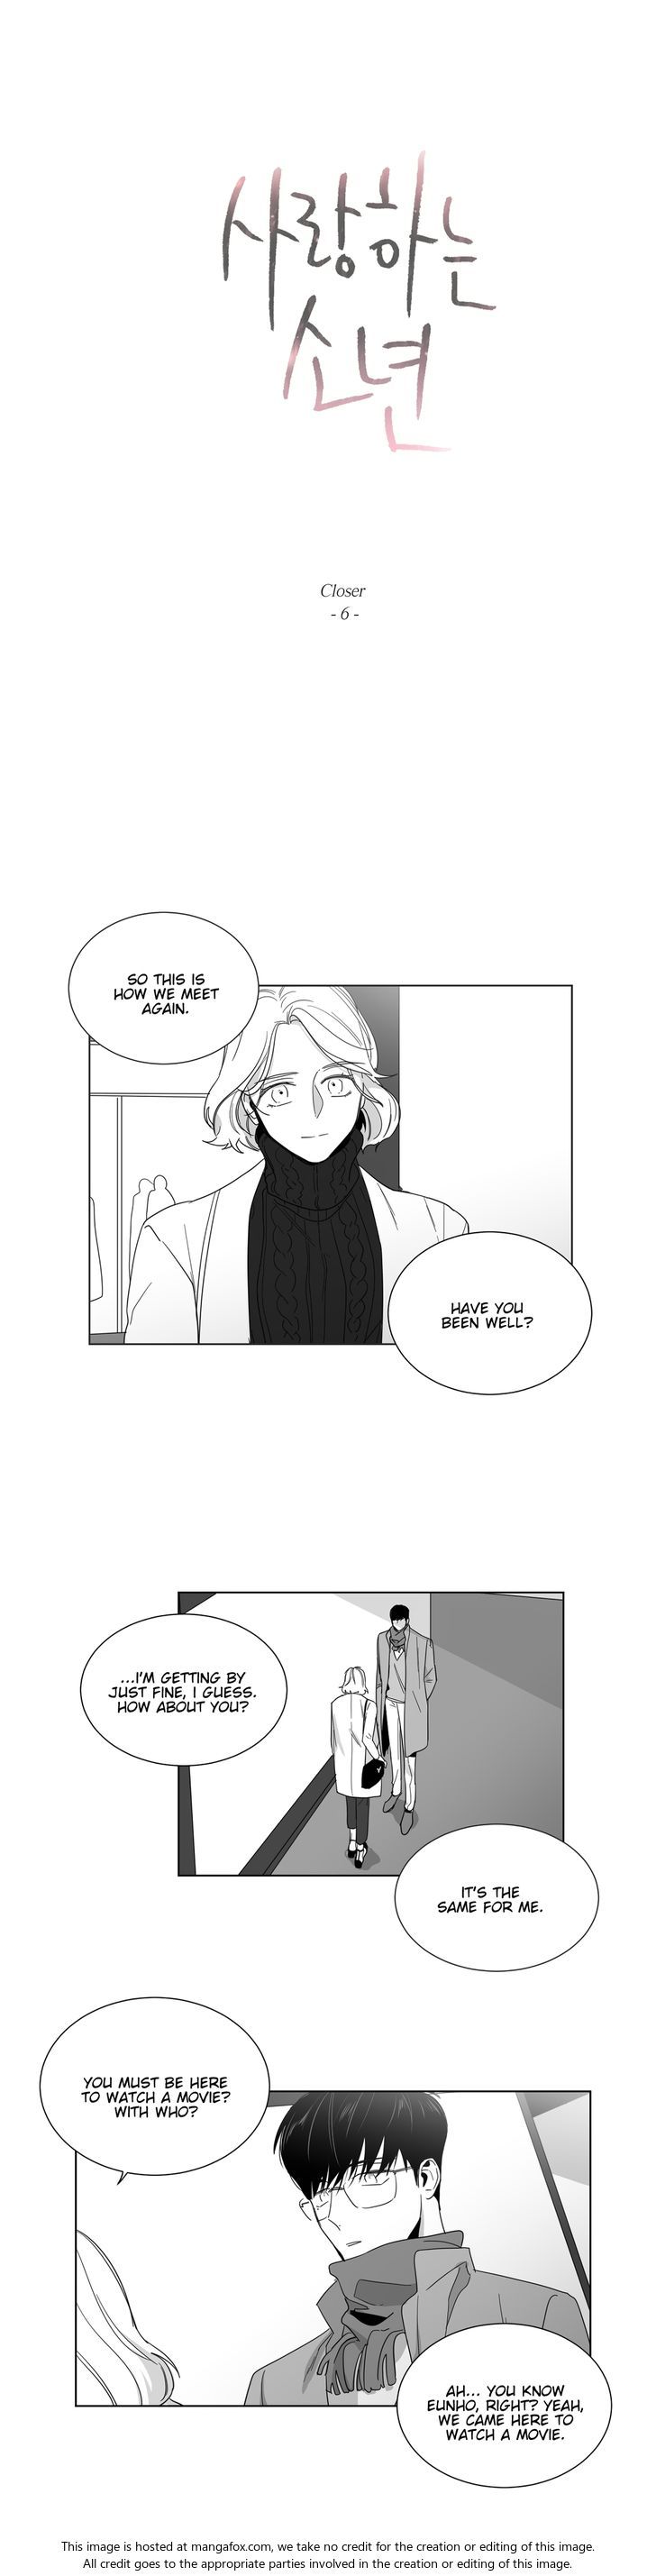 Lover Boy (Lezhin) Chapter 023 page 4